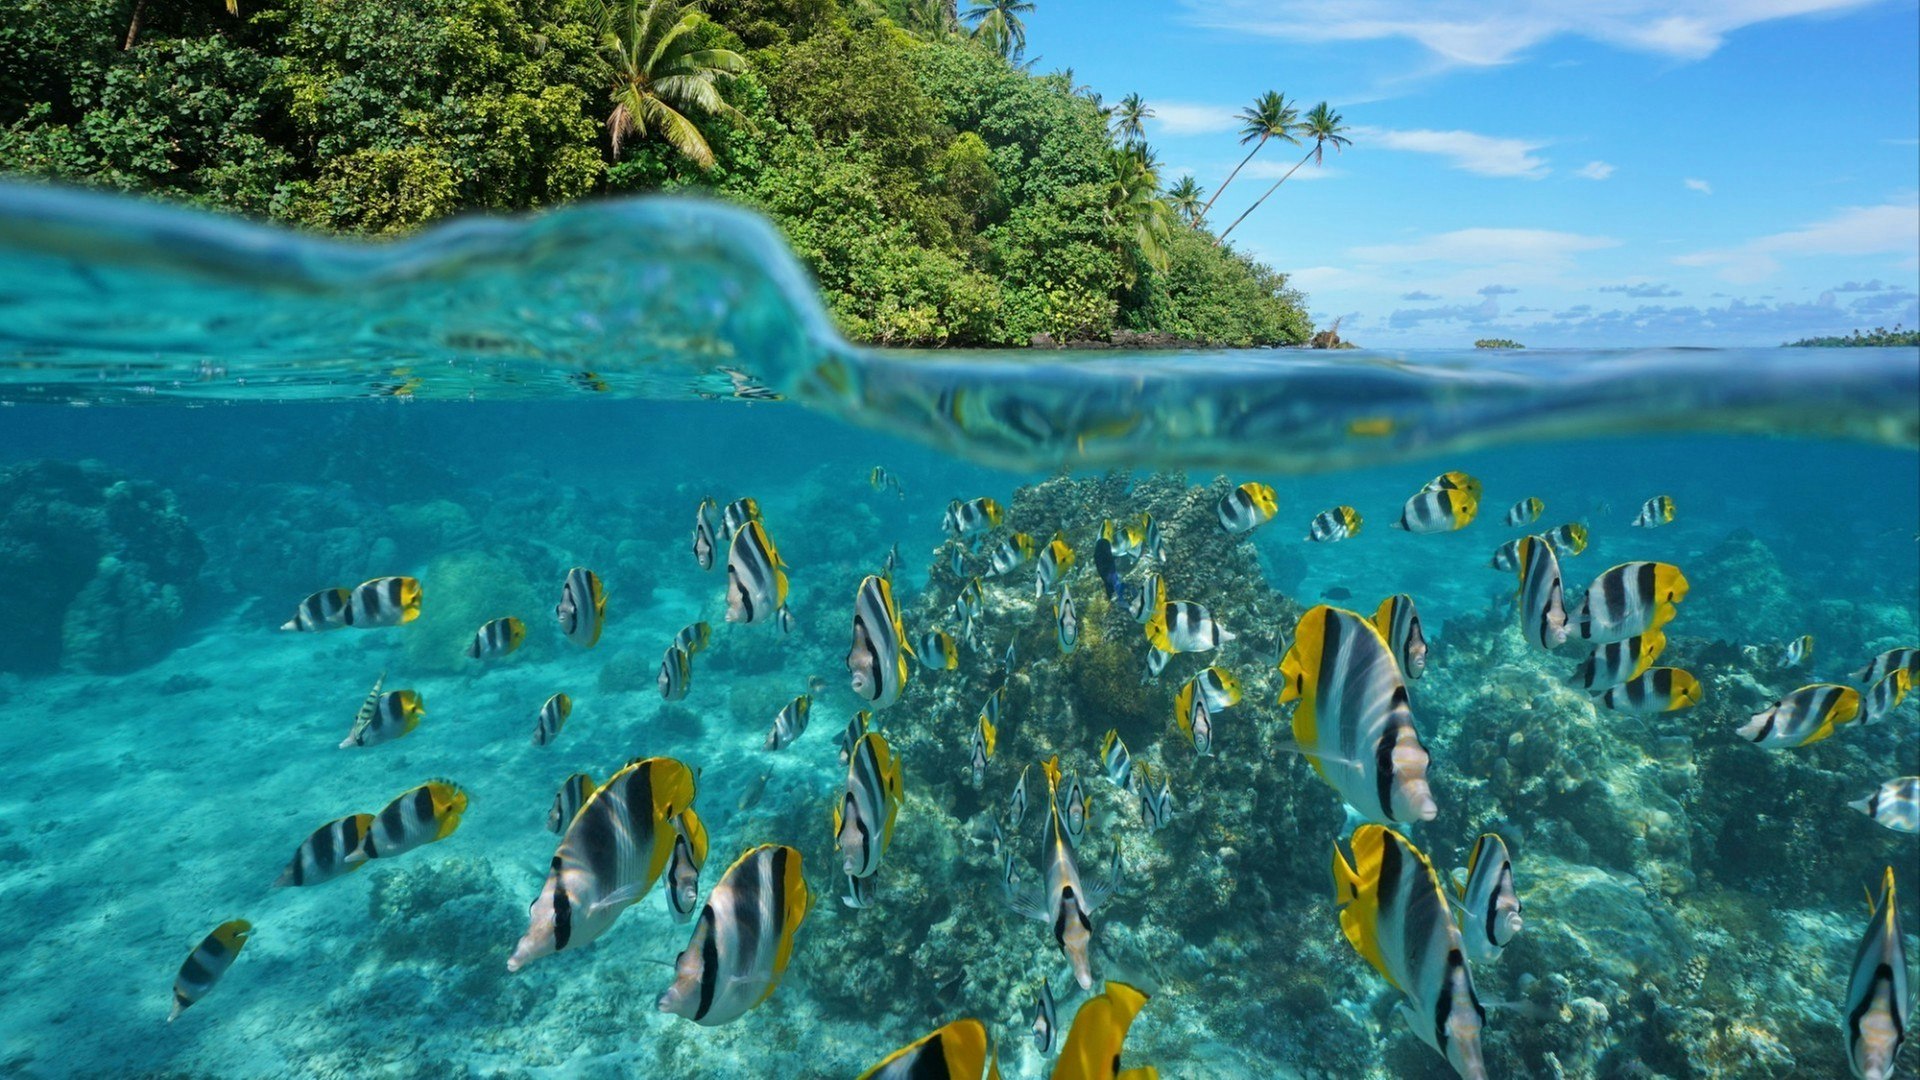 Over and under the sea near the shore of a lush wild coast with a school of tropical fish underwater split by waterline, Huahine island, Pacific ocean, French Polynesia